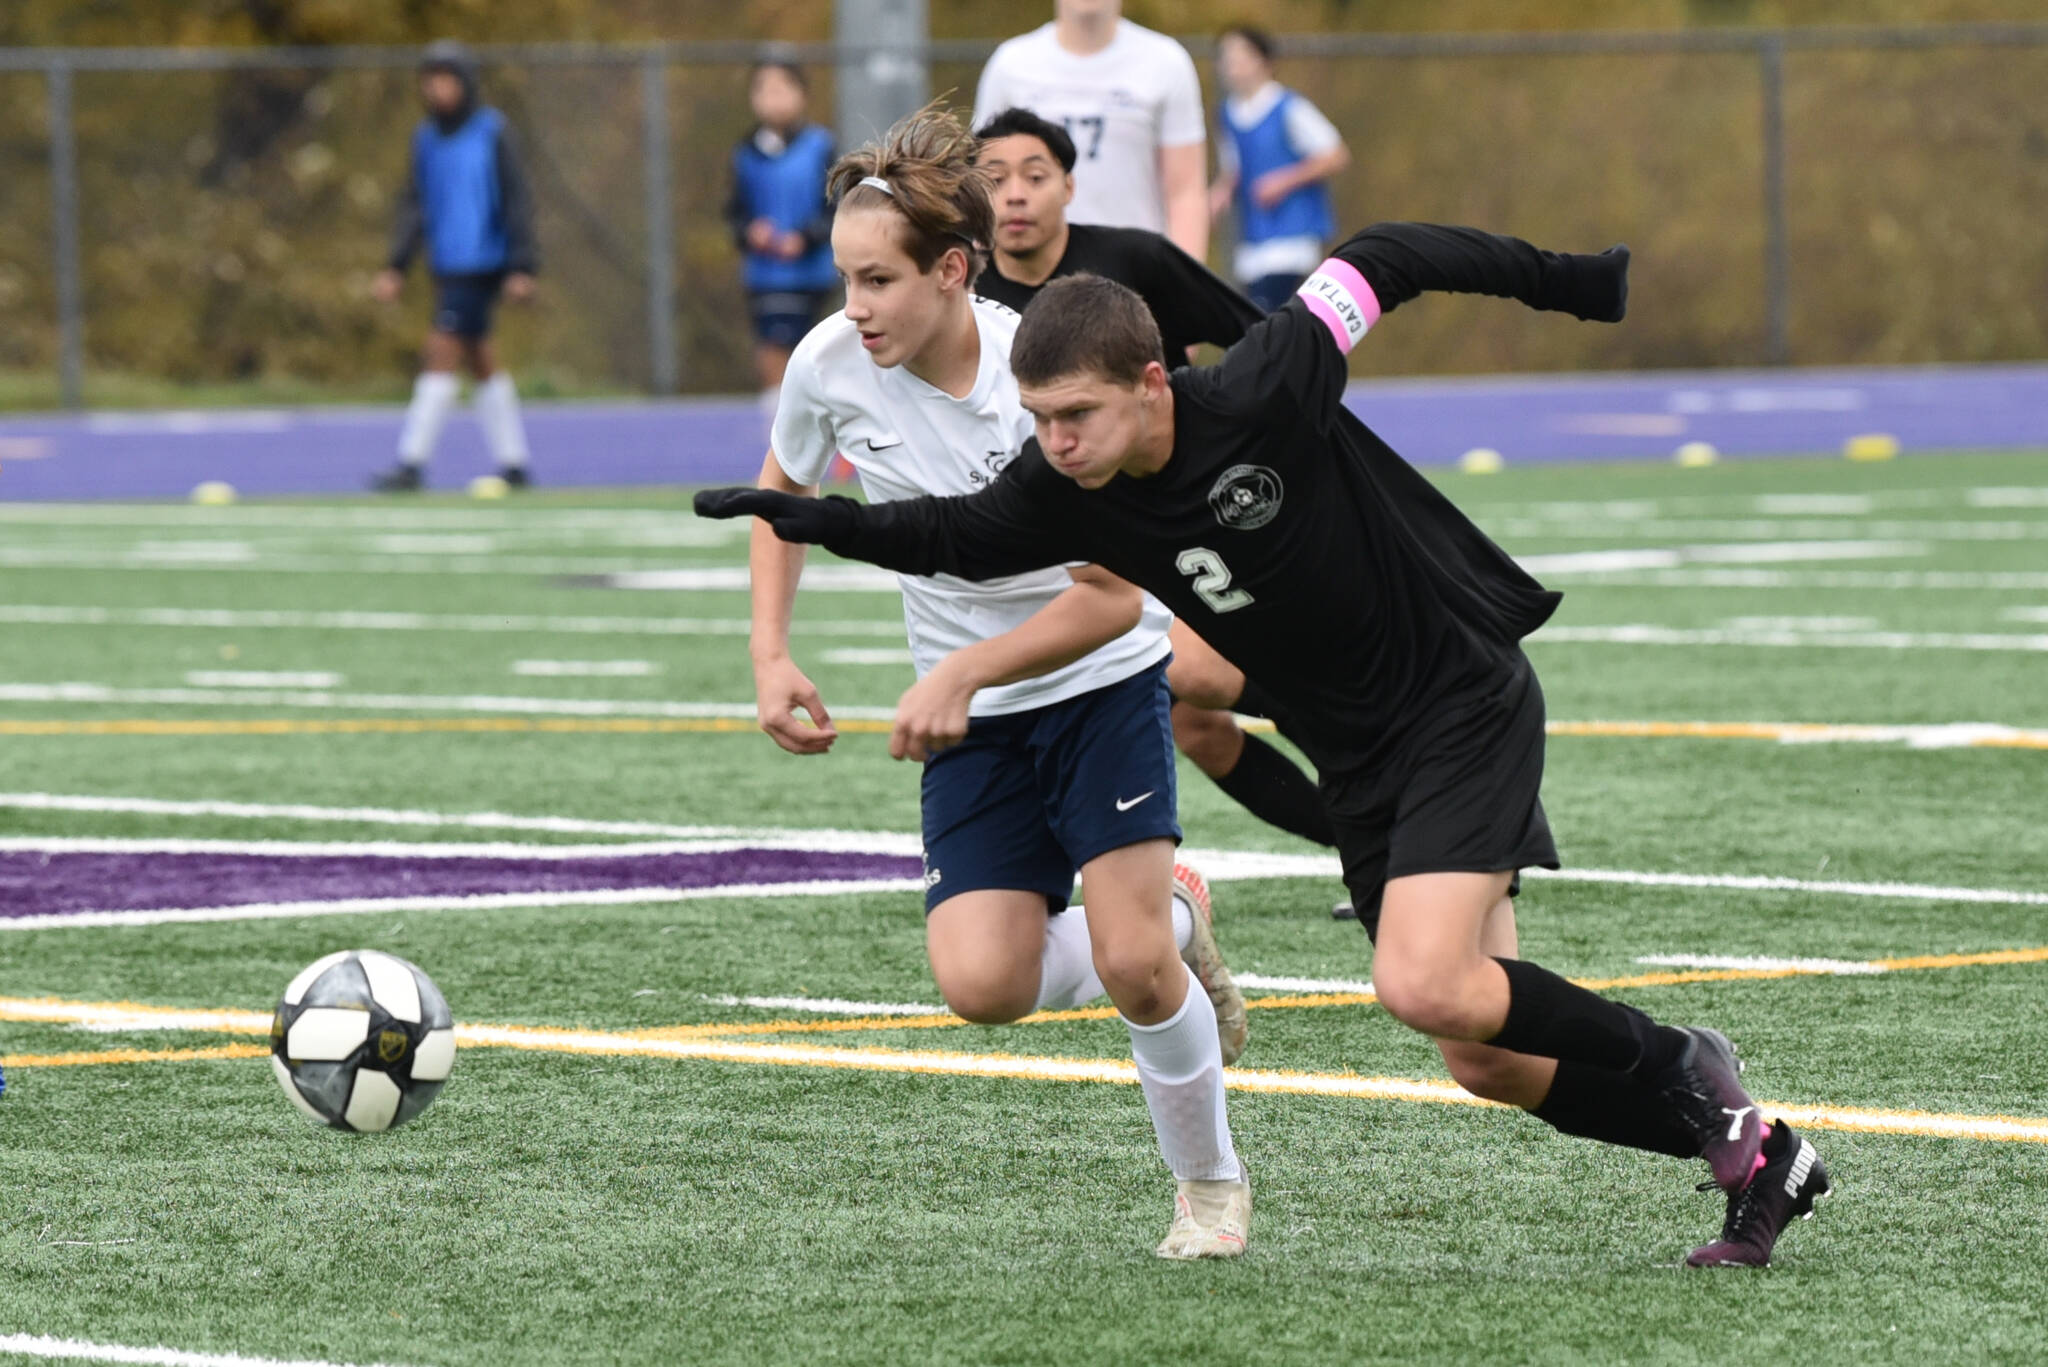 Chris Sutton photo
Junior Co-captain Tommy Anderson-Cleveland breaks hard on the ball to gain possession for the Vikings in the 5-0 routing of Puget Sound Adventist in the Elite 8 State State Playoff game.